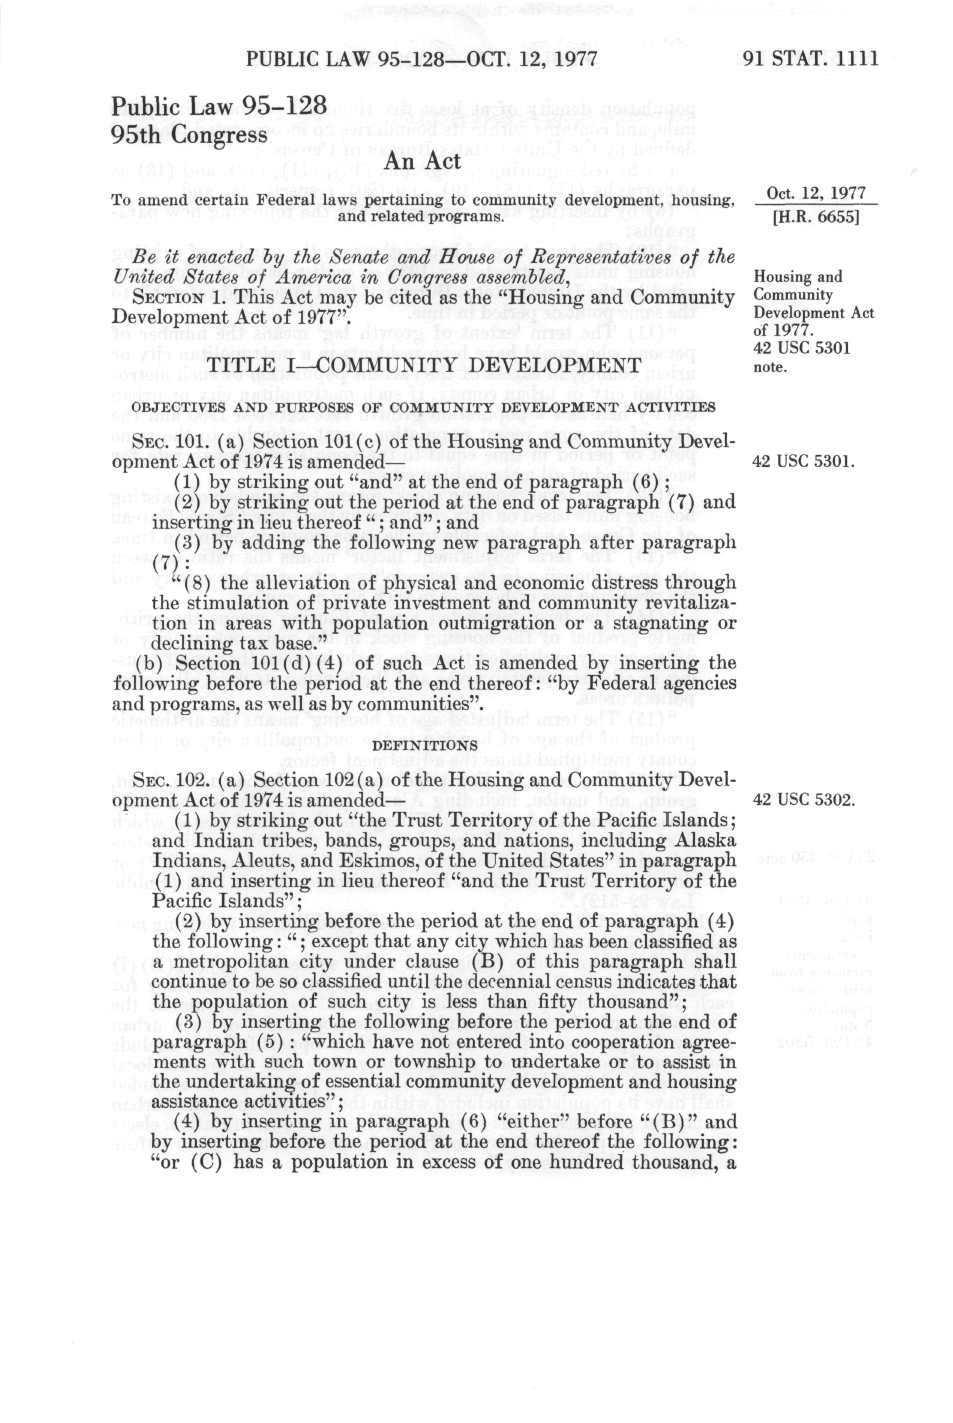 PUBLIC LAW 95-128 OCT. 12, 1977 Public Law 95-128 95th Congress. 91 STAT. 1111 v An Act To amend certain Federal laws pertaining to community development, housing, and related programs. Uct. Iz, [H.R.